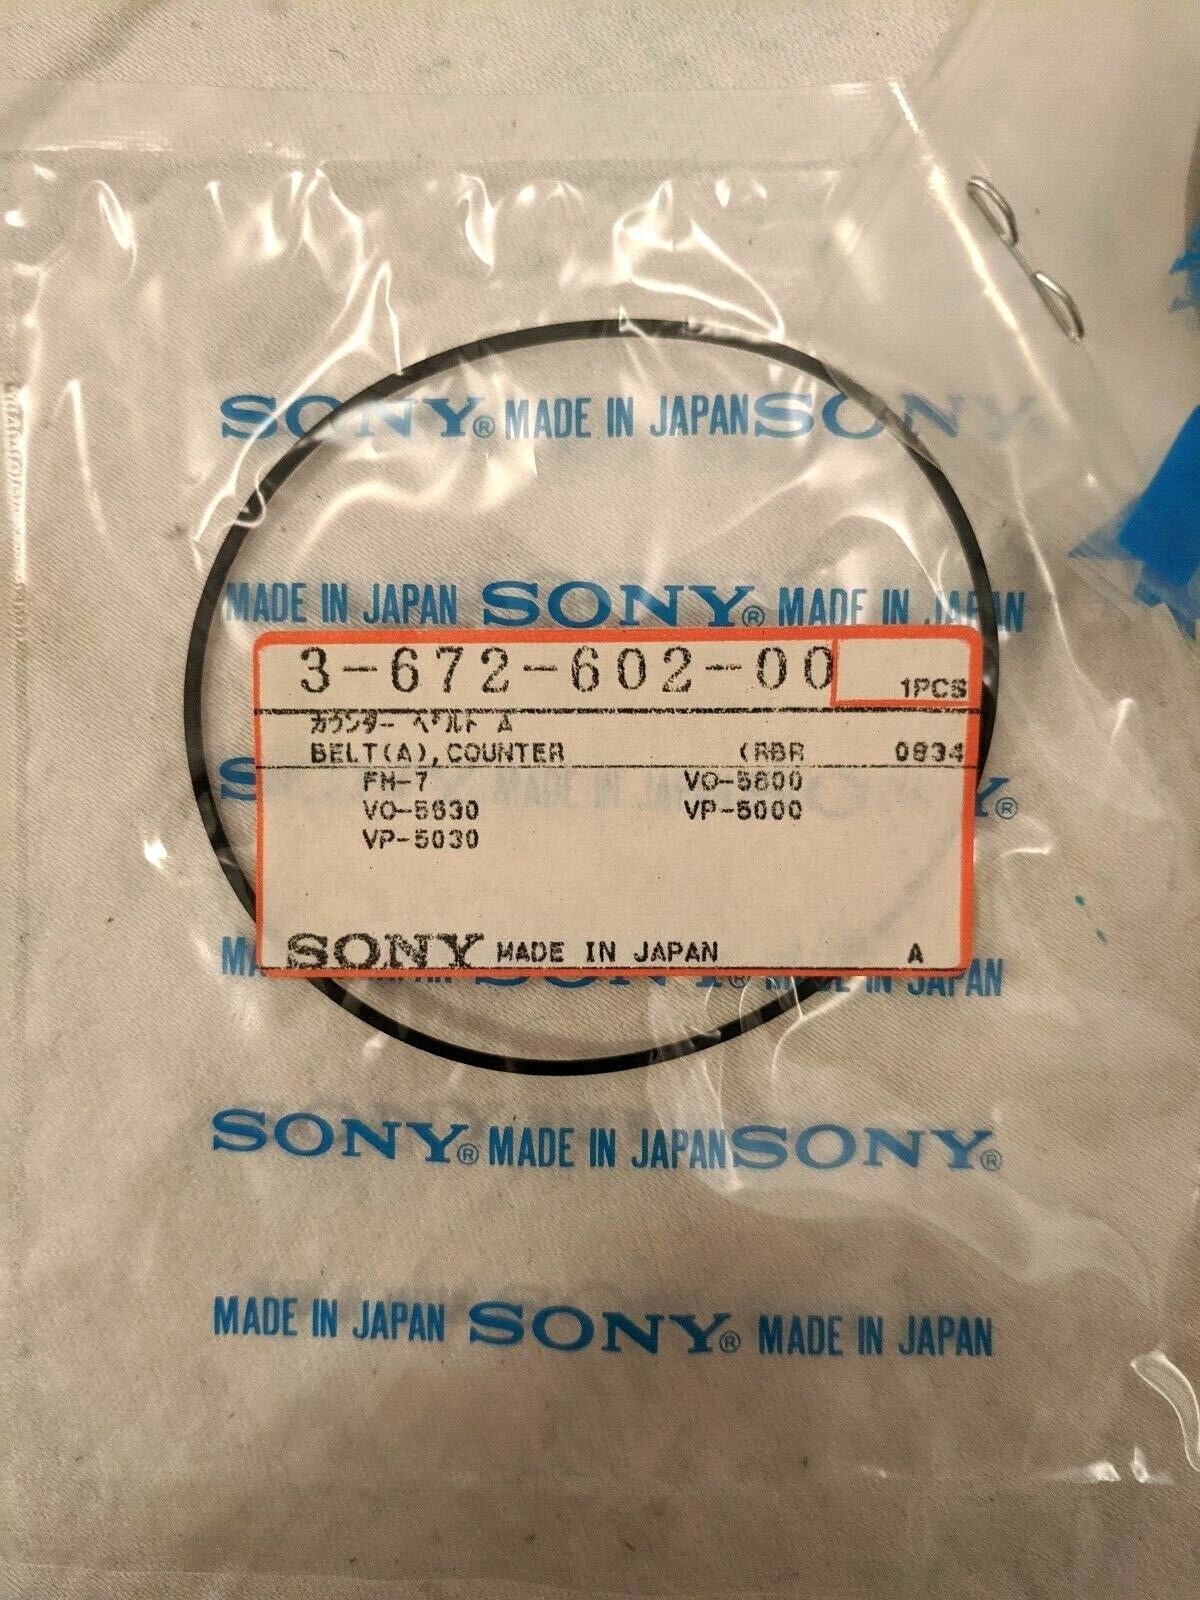 NEW, Old Stock Lot of 5 Sealed SONY Belt (a) Counter 3-672-602-00 vintage Sony Does not apply